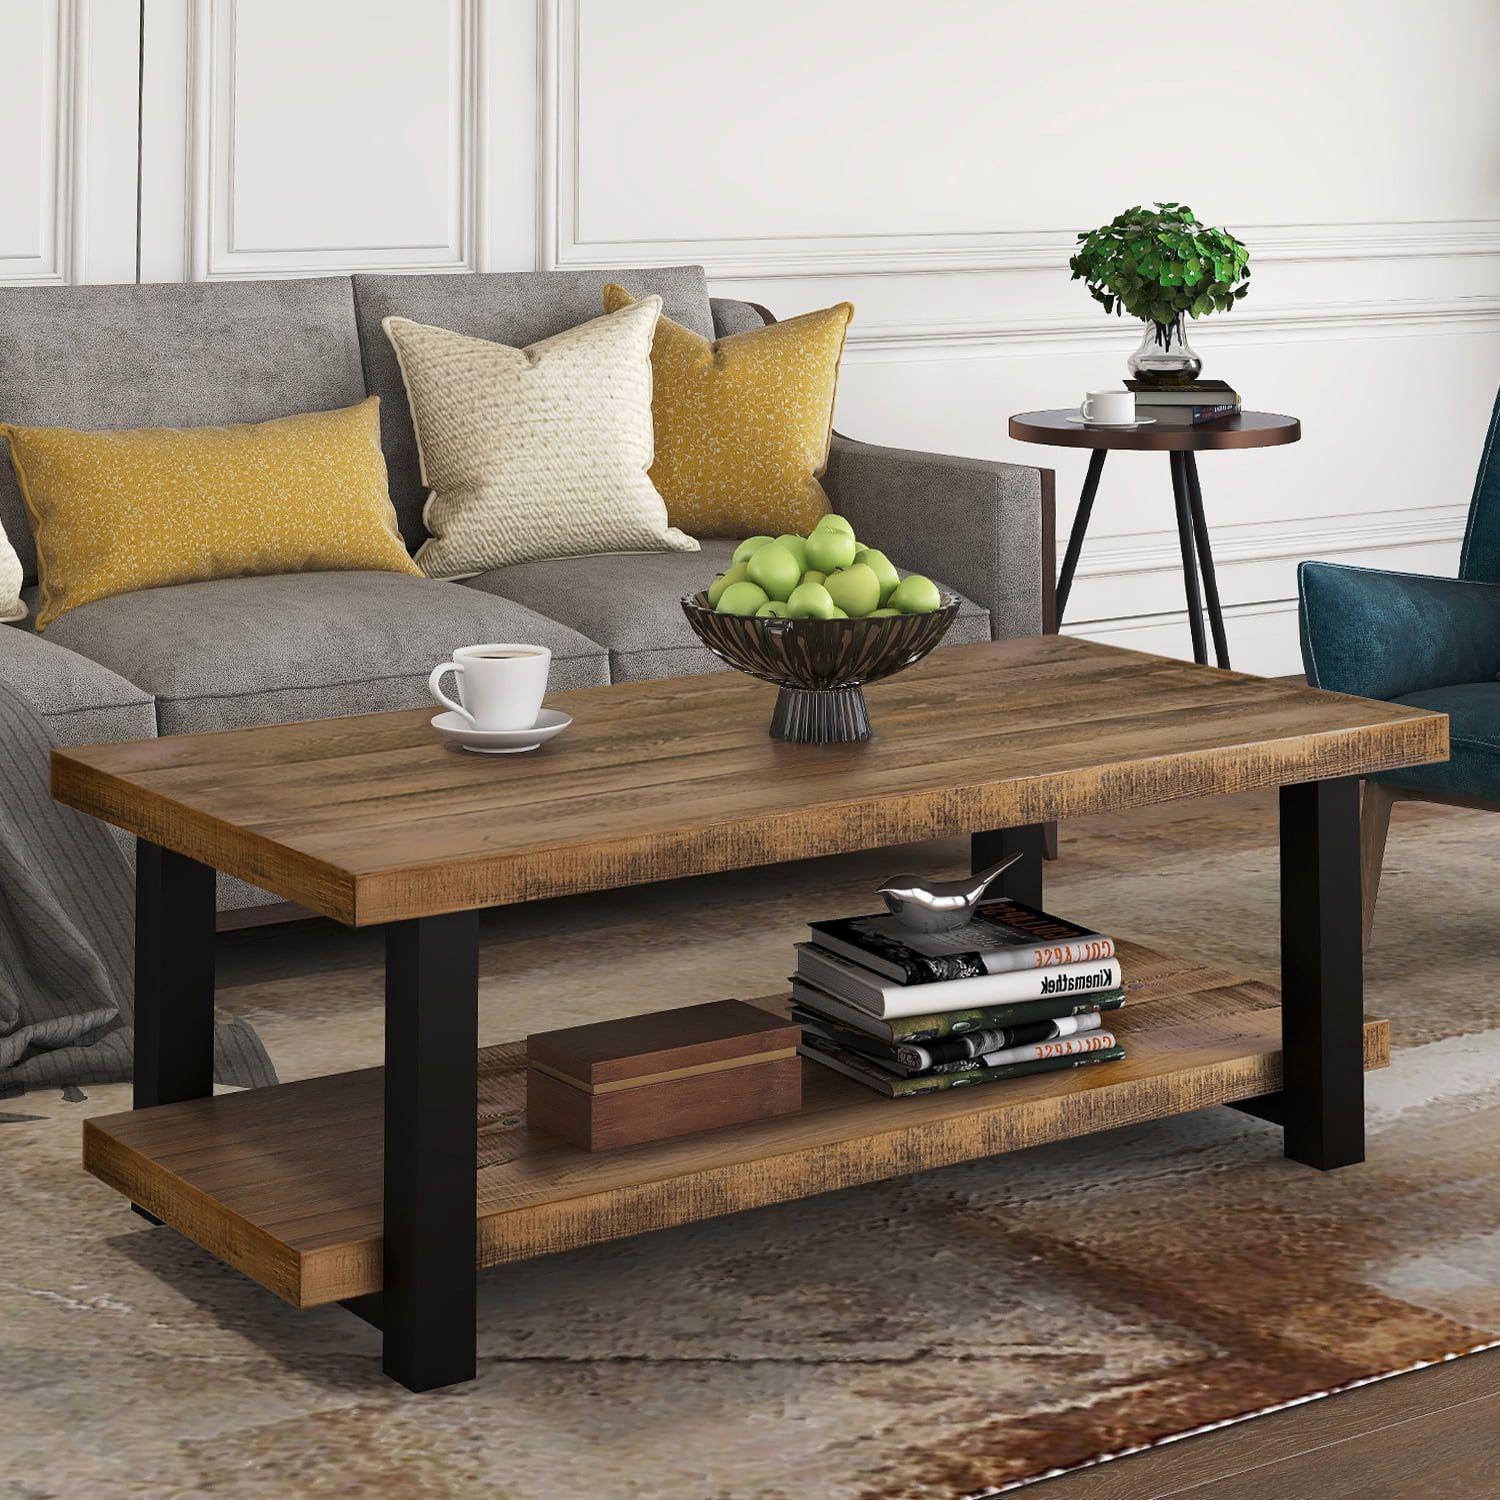 Topcobe Rustic Natural Coffee Table With Storage Shelf, Side End Table With Regard To Coffee Tables With Storage And Barn Doors (View 17 of 20)